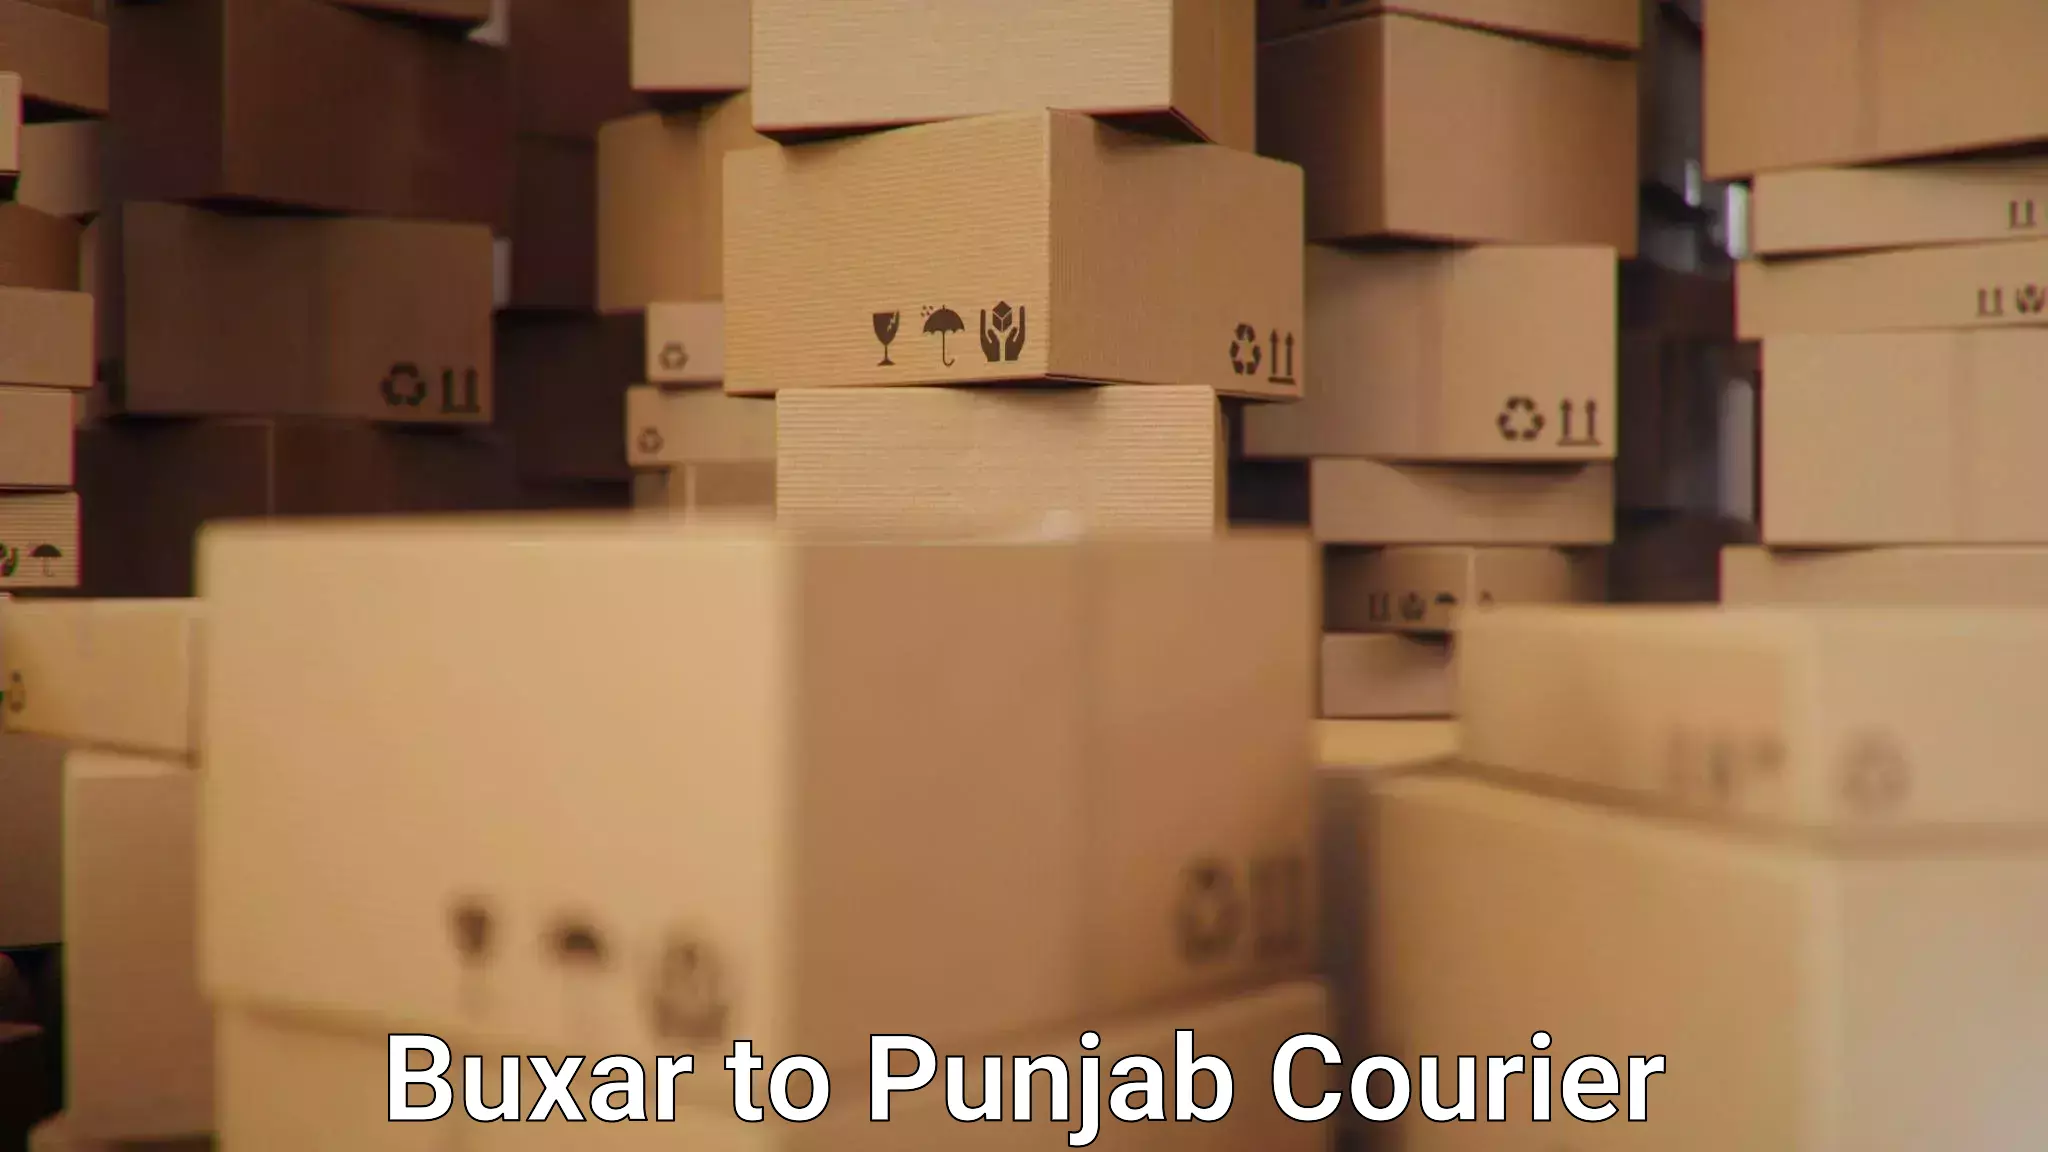 Residential courier service Buxar to Mohali